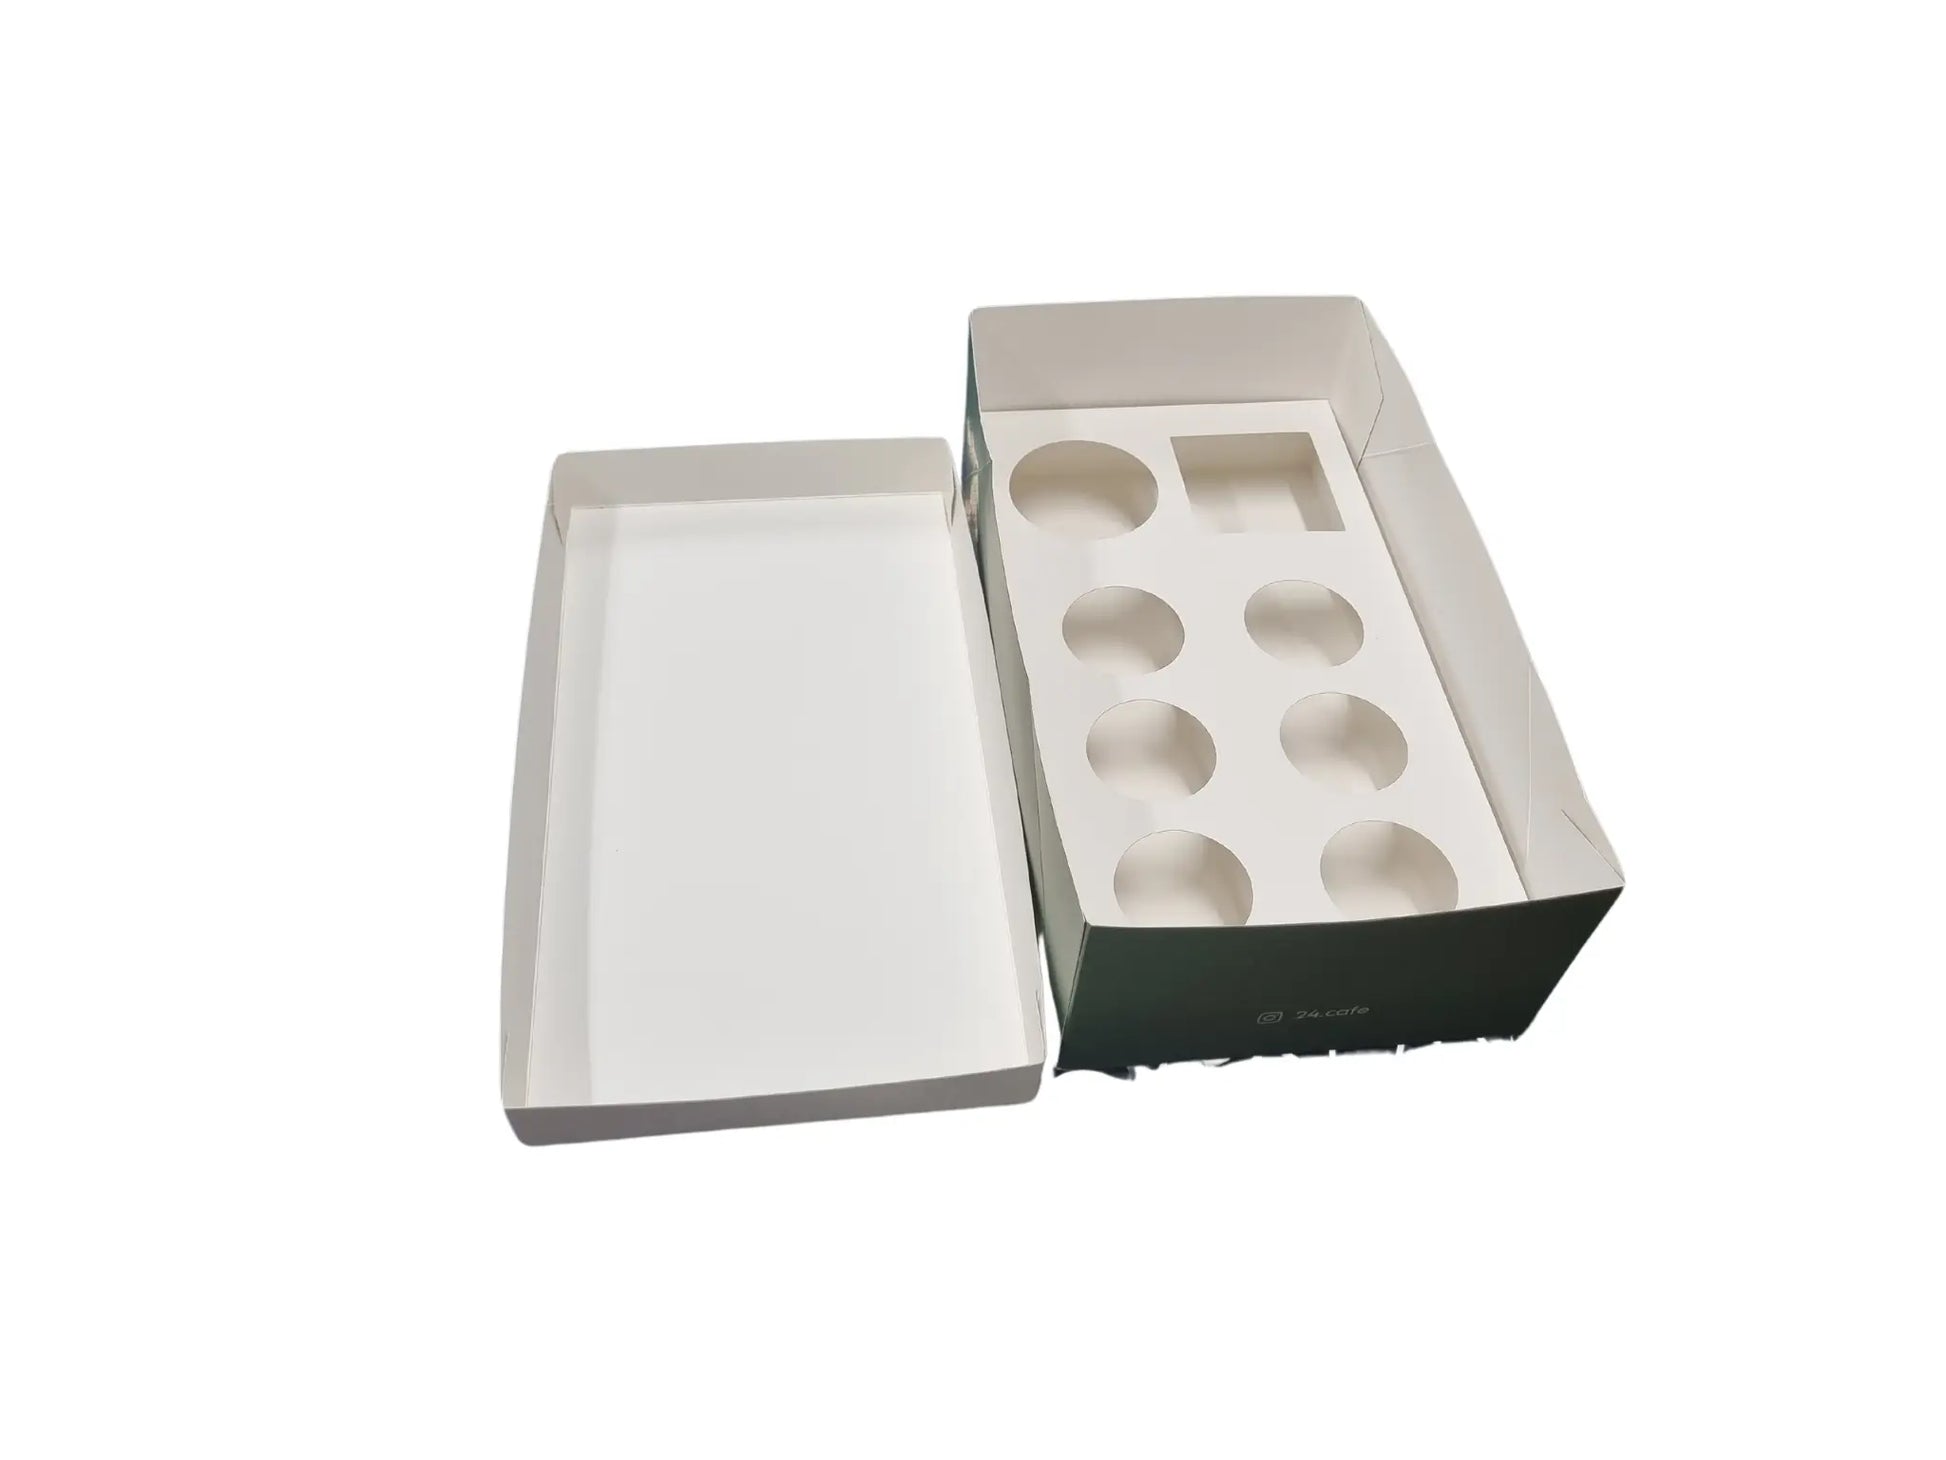 Box length 38 cm, width 21 cm, height 12 cm Printed with slots for 1 dish and 1 cup and 6 sauces Box length 38 cm, width 21 cm, height 12 cm Printed with slots for 1 dish and 1 cup and 6 sauces Madar Print Madar Print